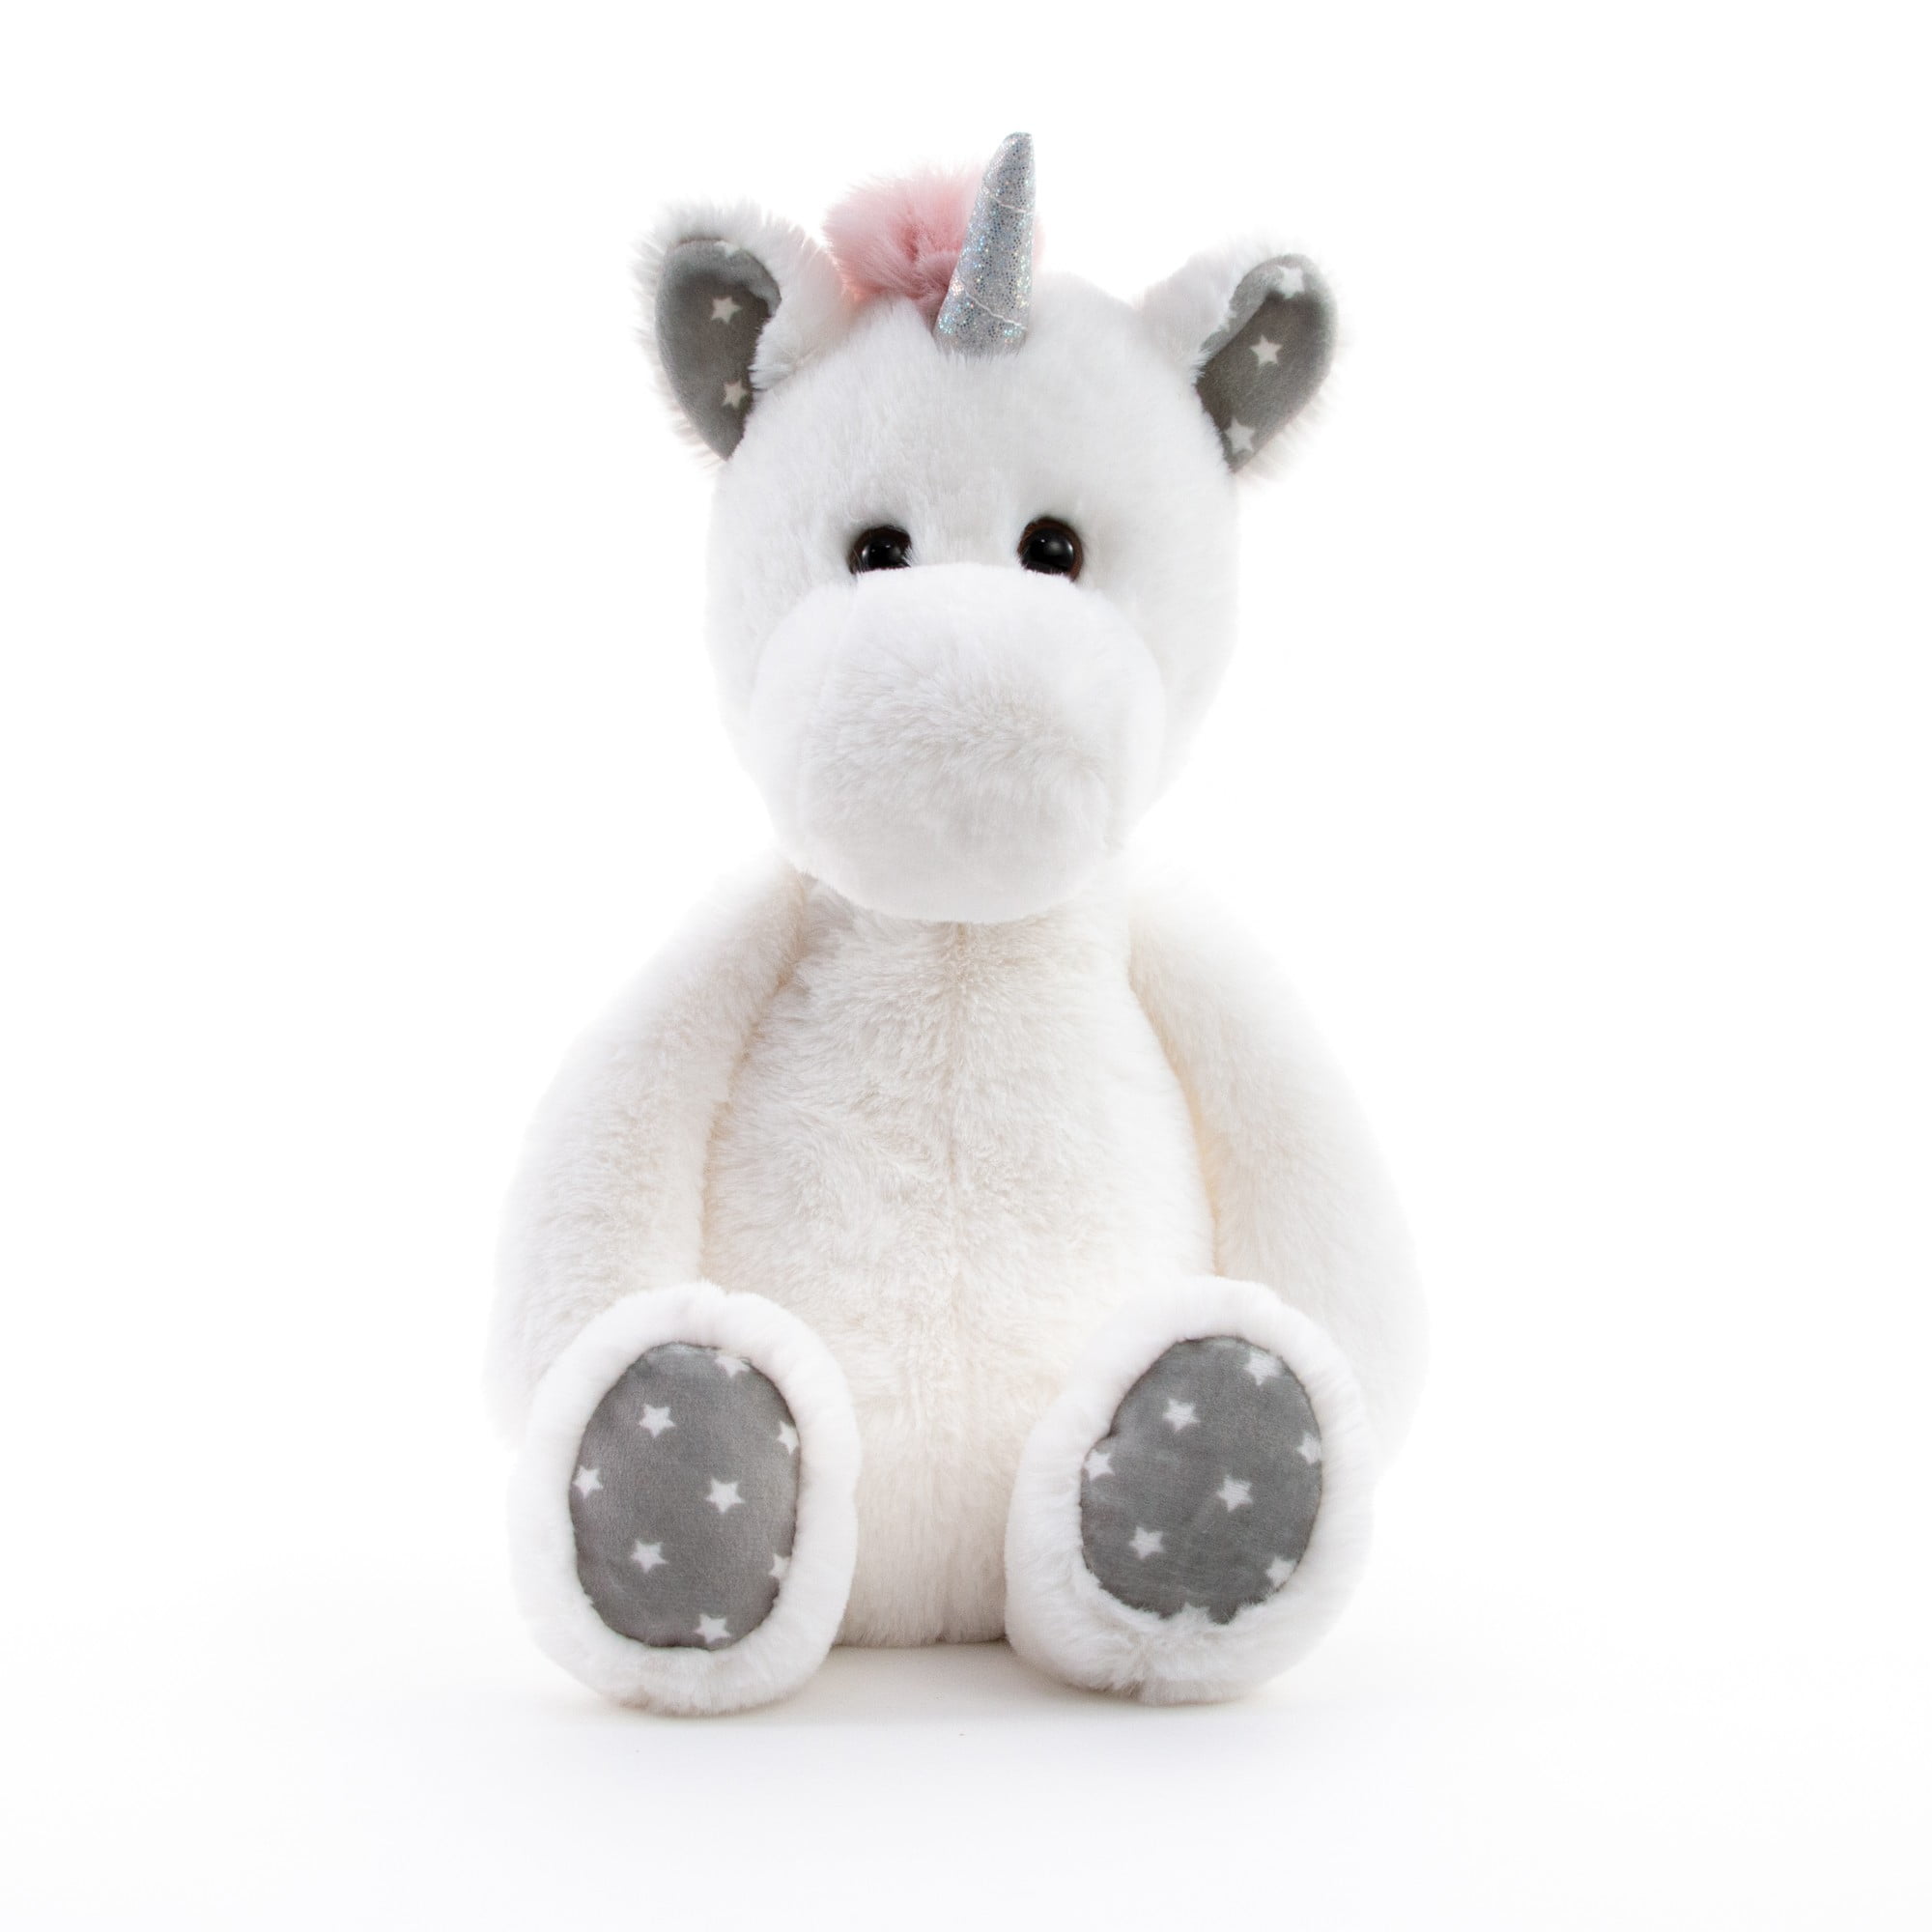 Details about   SCRAPPIES 14" Unexpected Unicorn Softest Plush Stuffed Animals Cute Plush... 